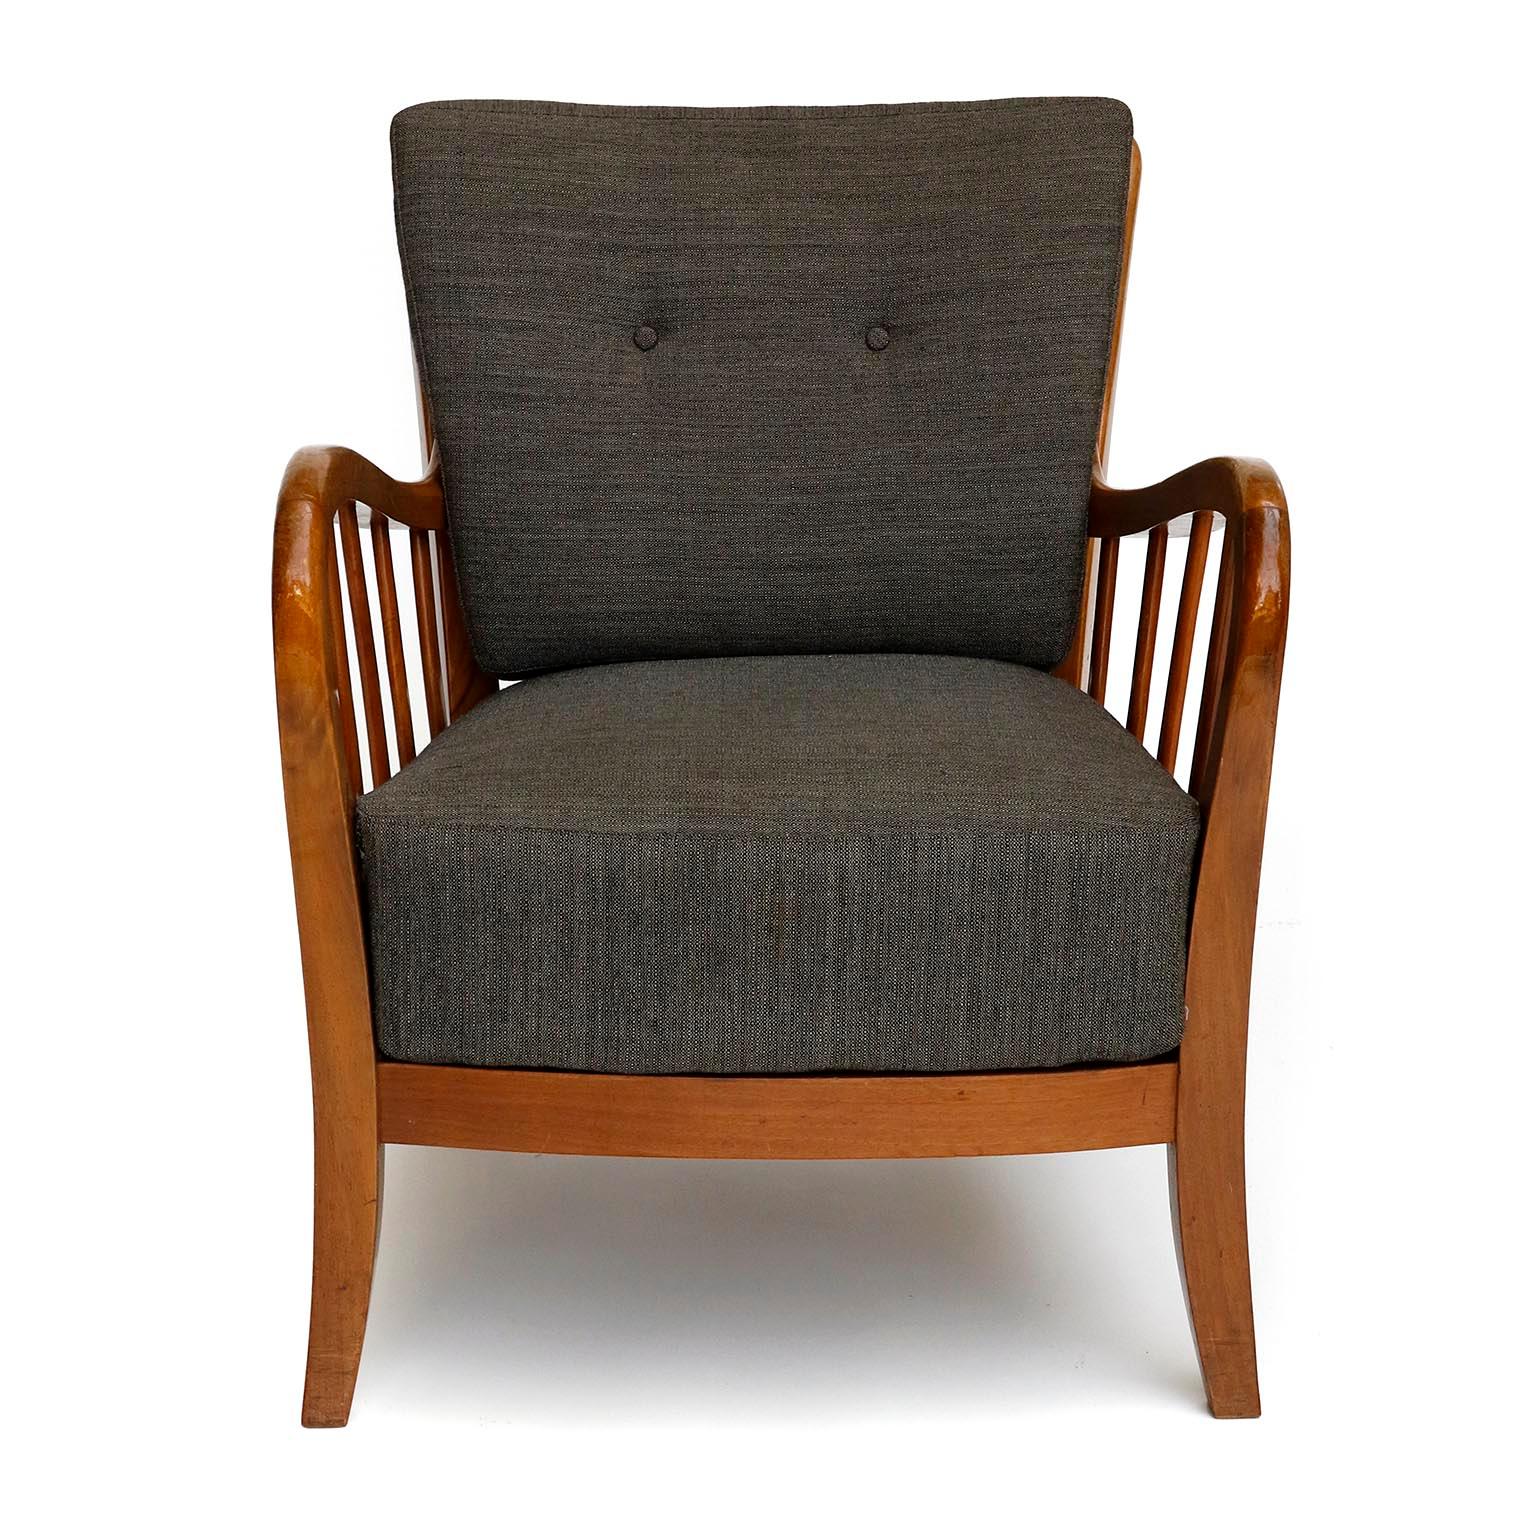 A pair of arm lounge chairs manufactured by Thonet in late 1930s or early 1940s.
The design is attributed to Josef Frank. It is also in the style of Paolo Buffa or Gio Ponti.
These large, comfortable, handmade chairs are made of warm toned walnut